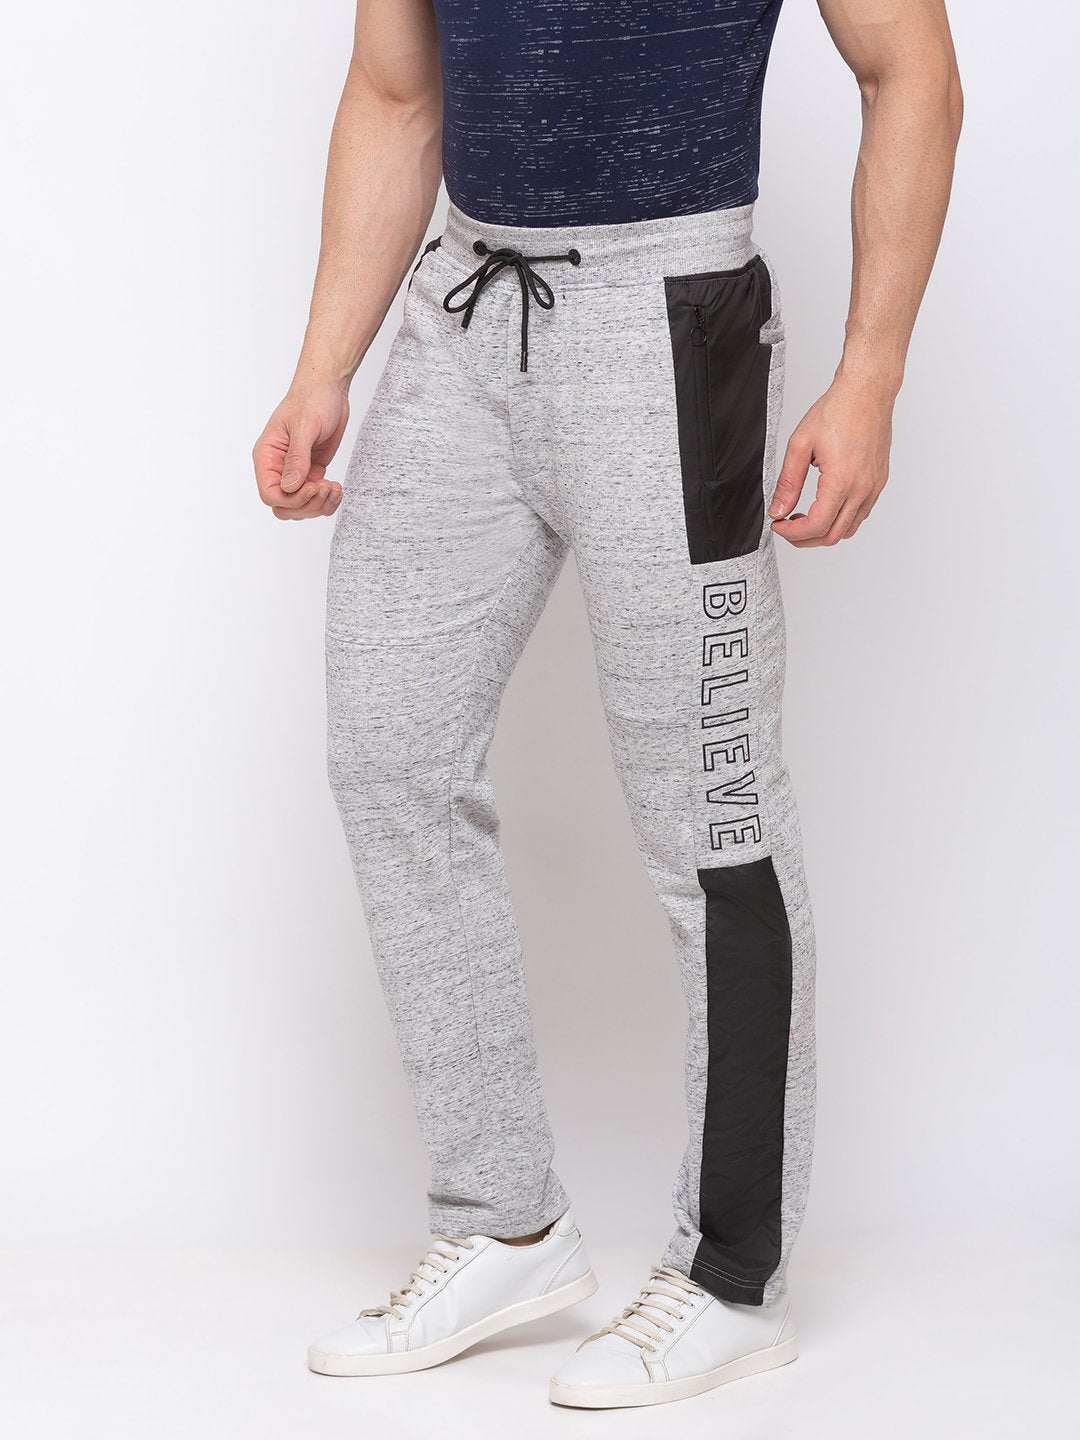 VERSATYL Men's Streachable Cotton Slim Fit Track Pants with Zip Pockets for  Gym – Blue in Kollam at best price by Emirate Fashions Pvt Ltd - Justdial